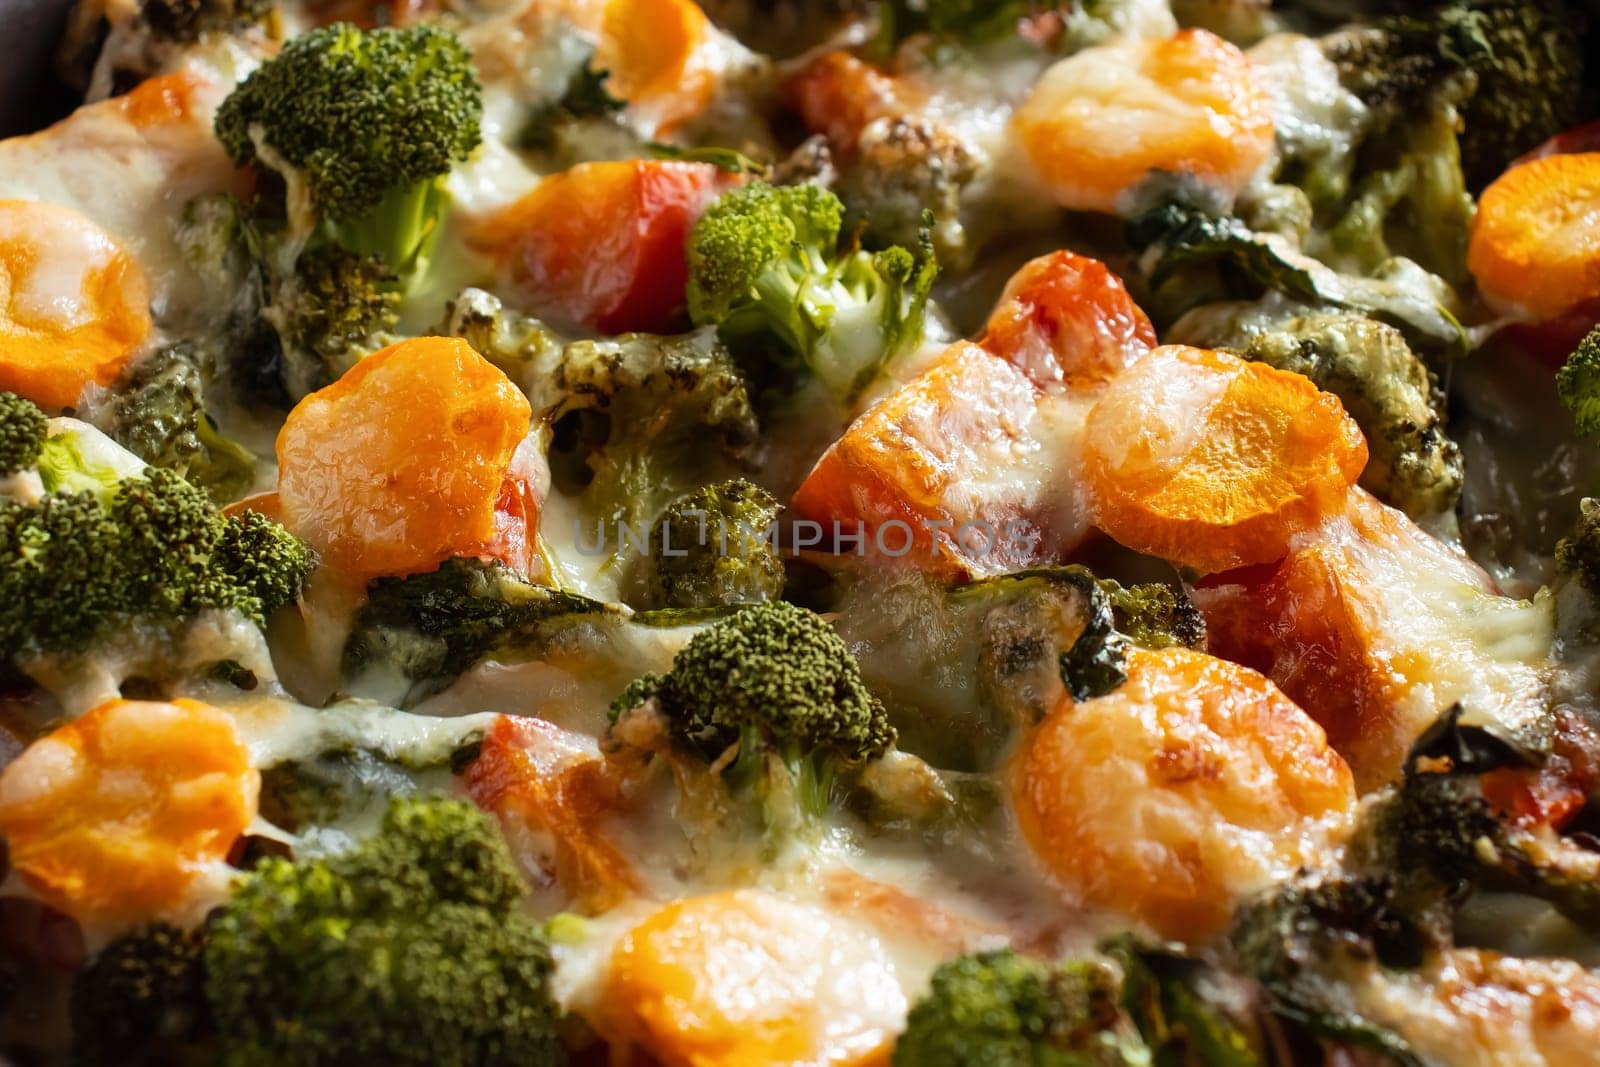 Gratin with broccoli, carrots and cheese baked in the oven on a dark wooden table, close up.